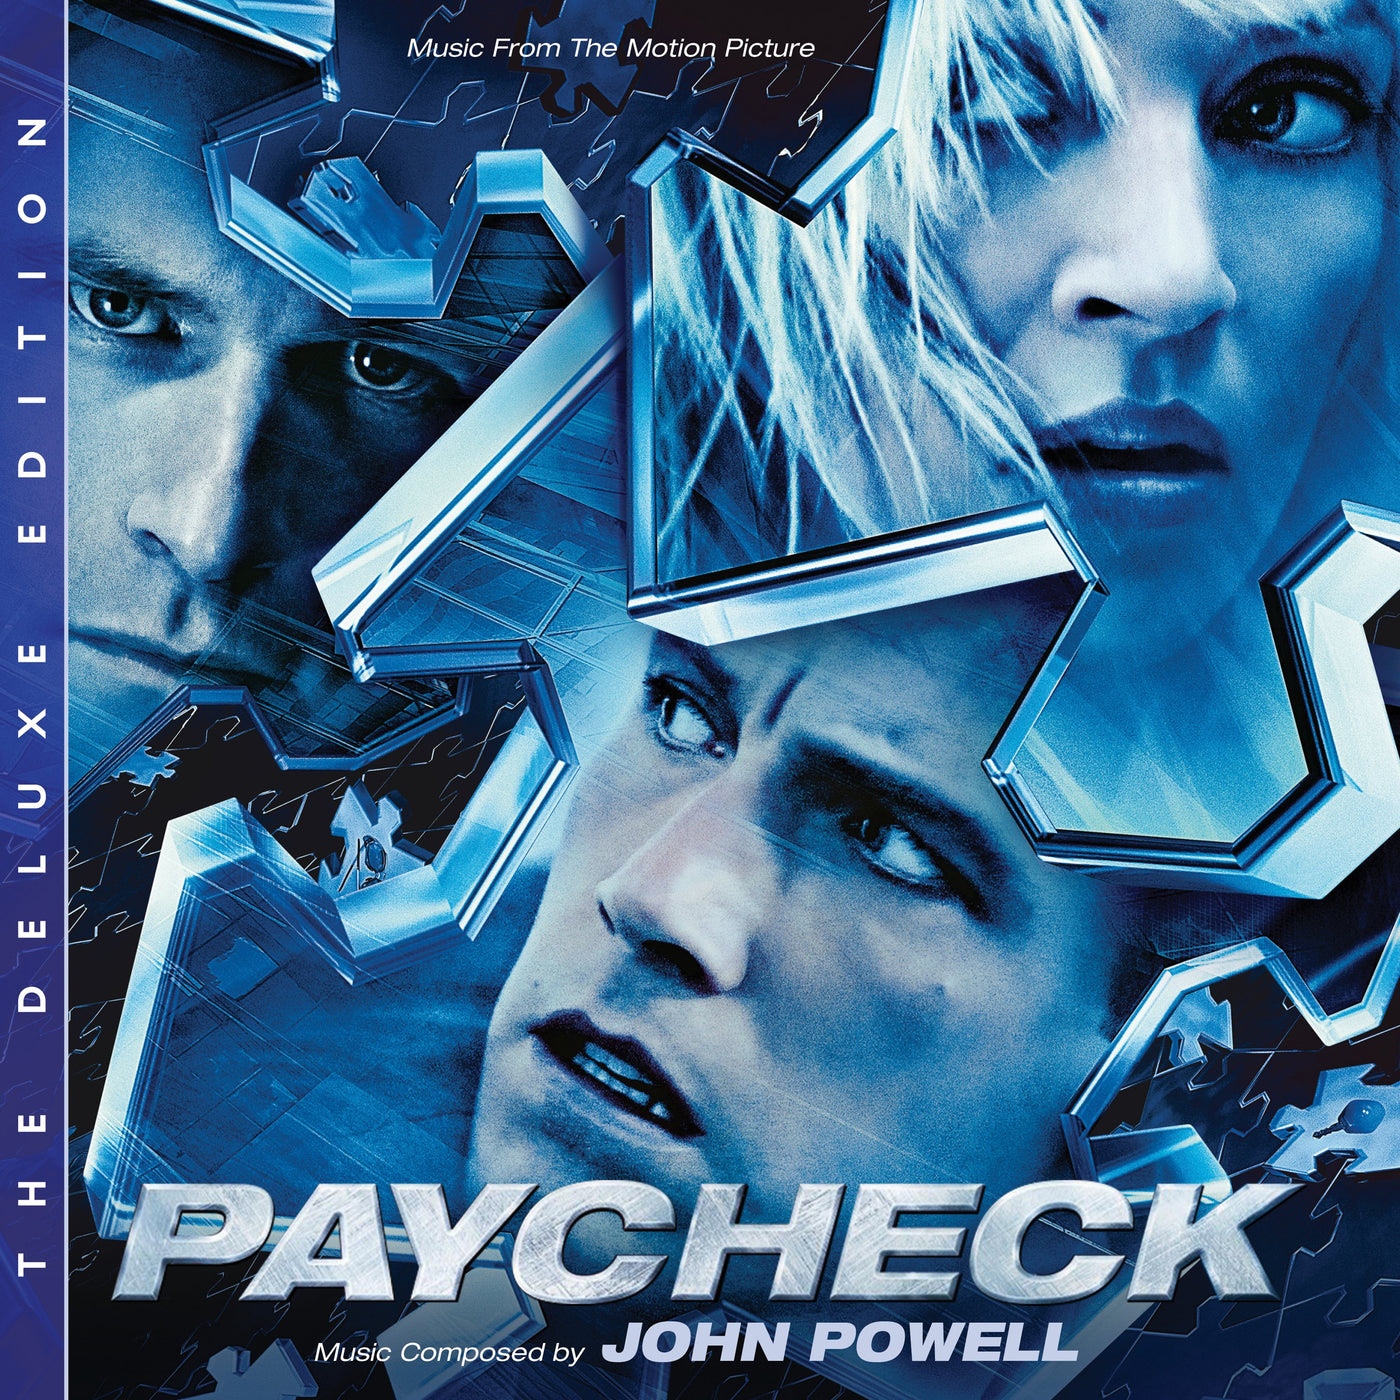 Paycheck: The Deluxe Edition (Music From The Motion Picture) (2-CD)